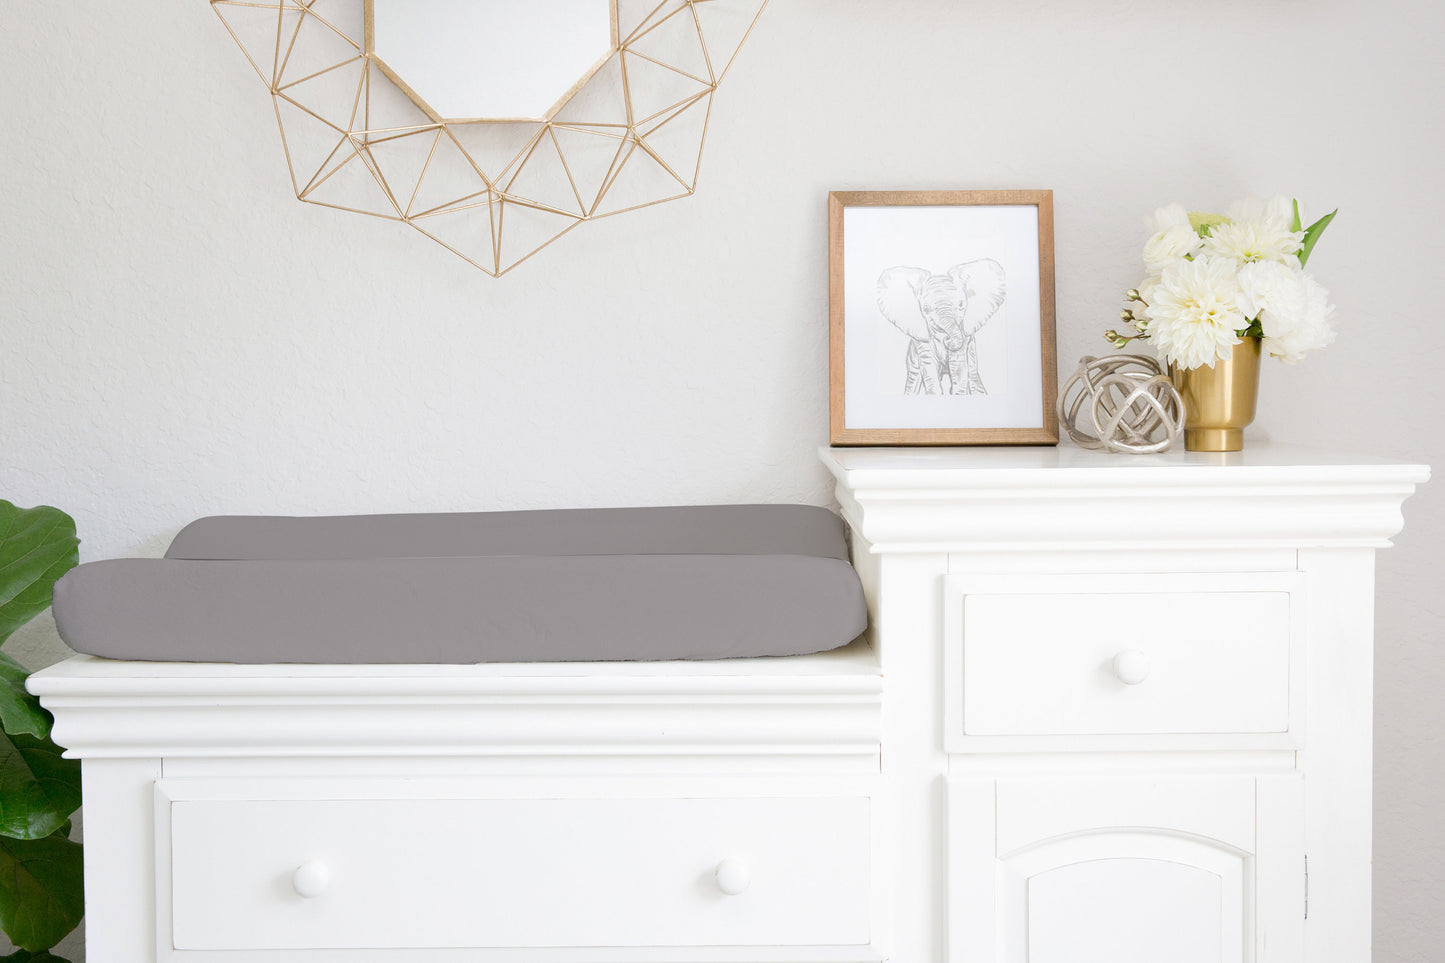 solid gray changing pad cover shown in nursery